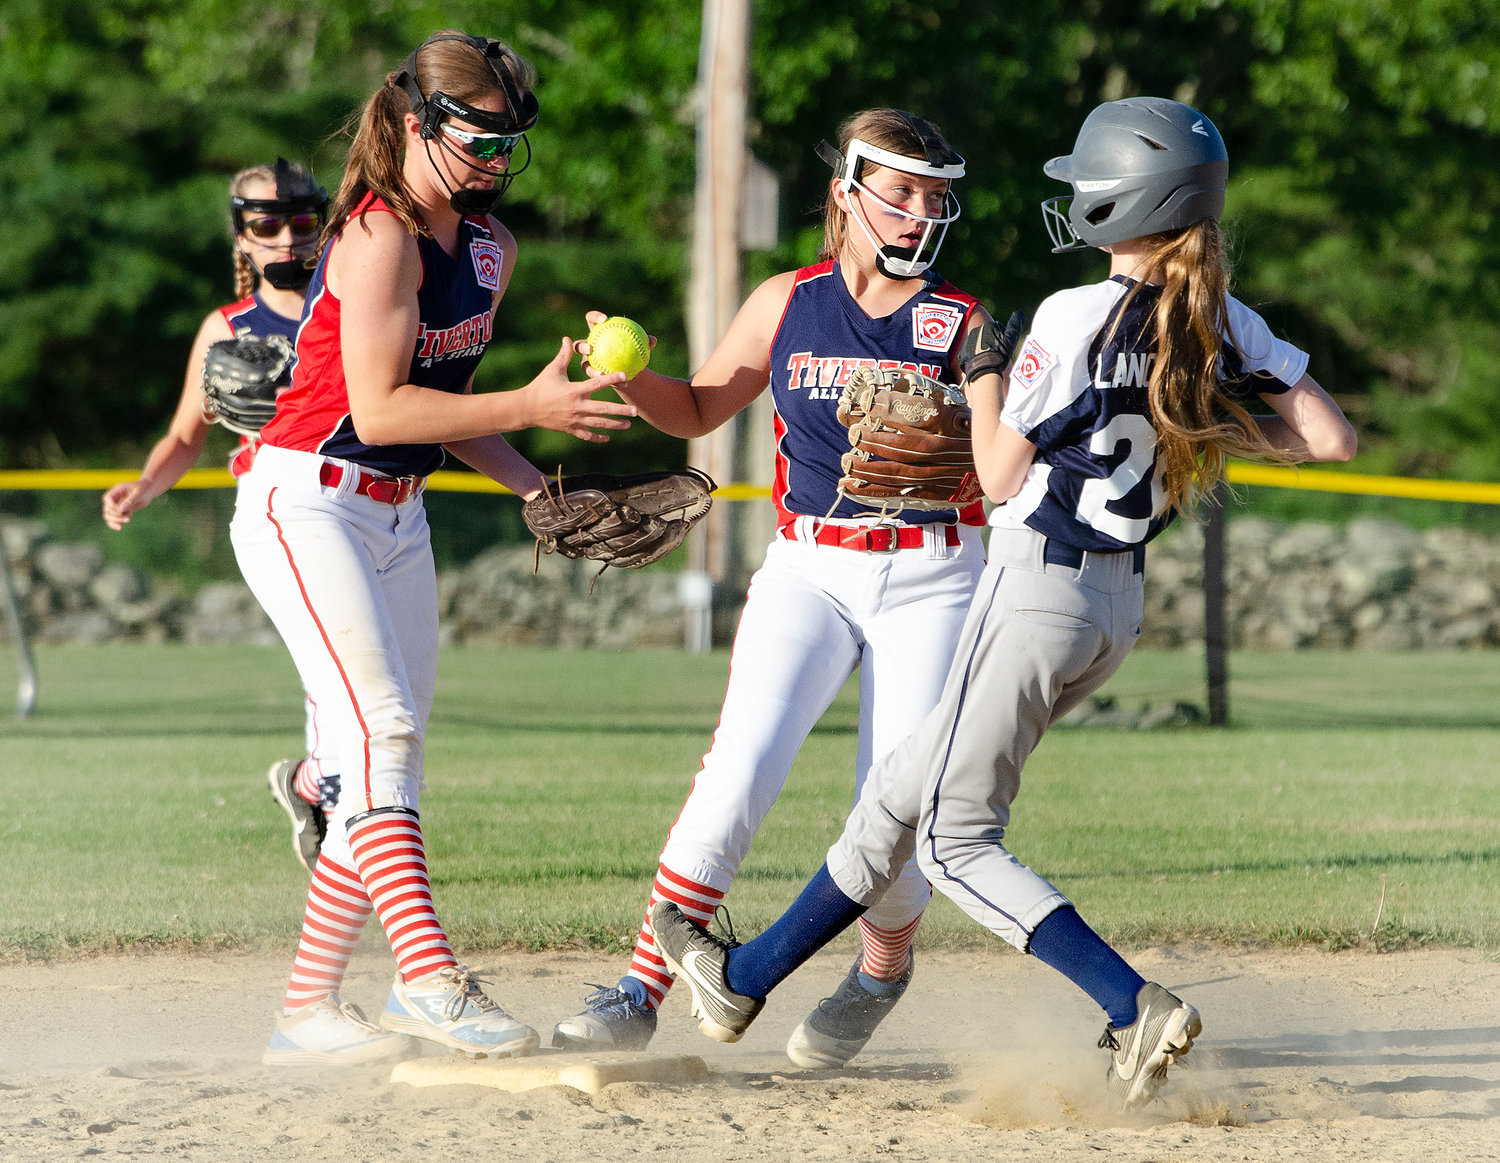 Shortstop Elodie Cannon (left) looks on as second baseman Brooke Sowa steps on second for an out and prepares to throw to first for a double play.